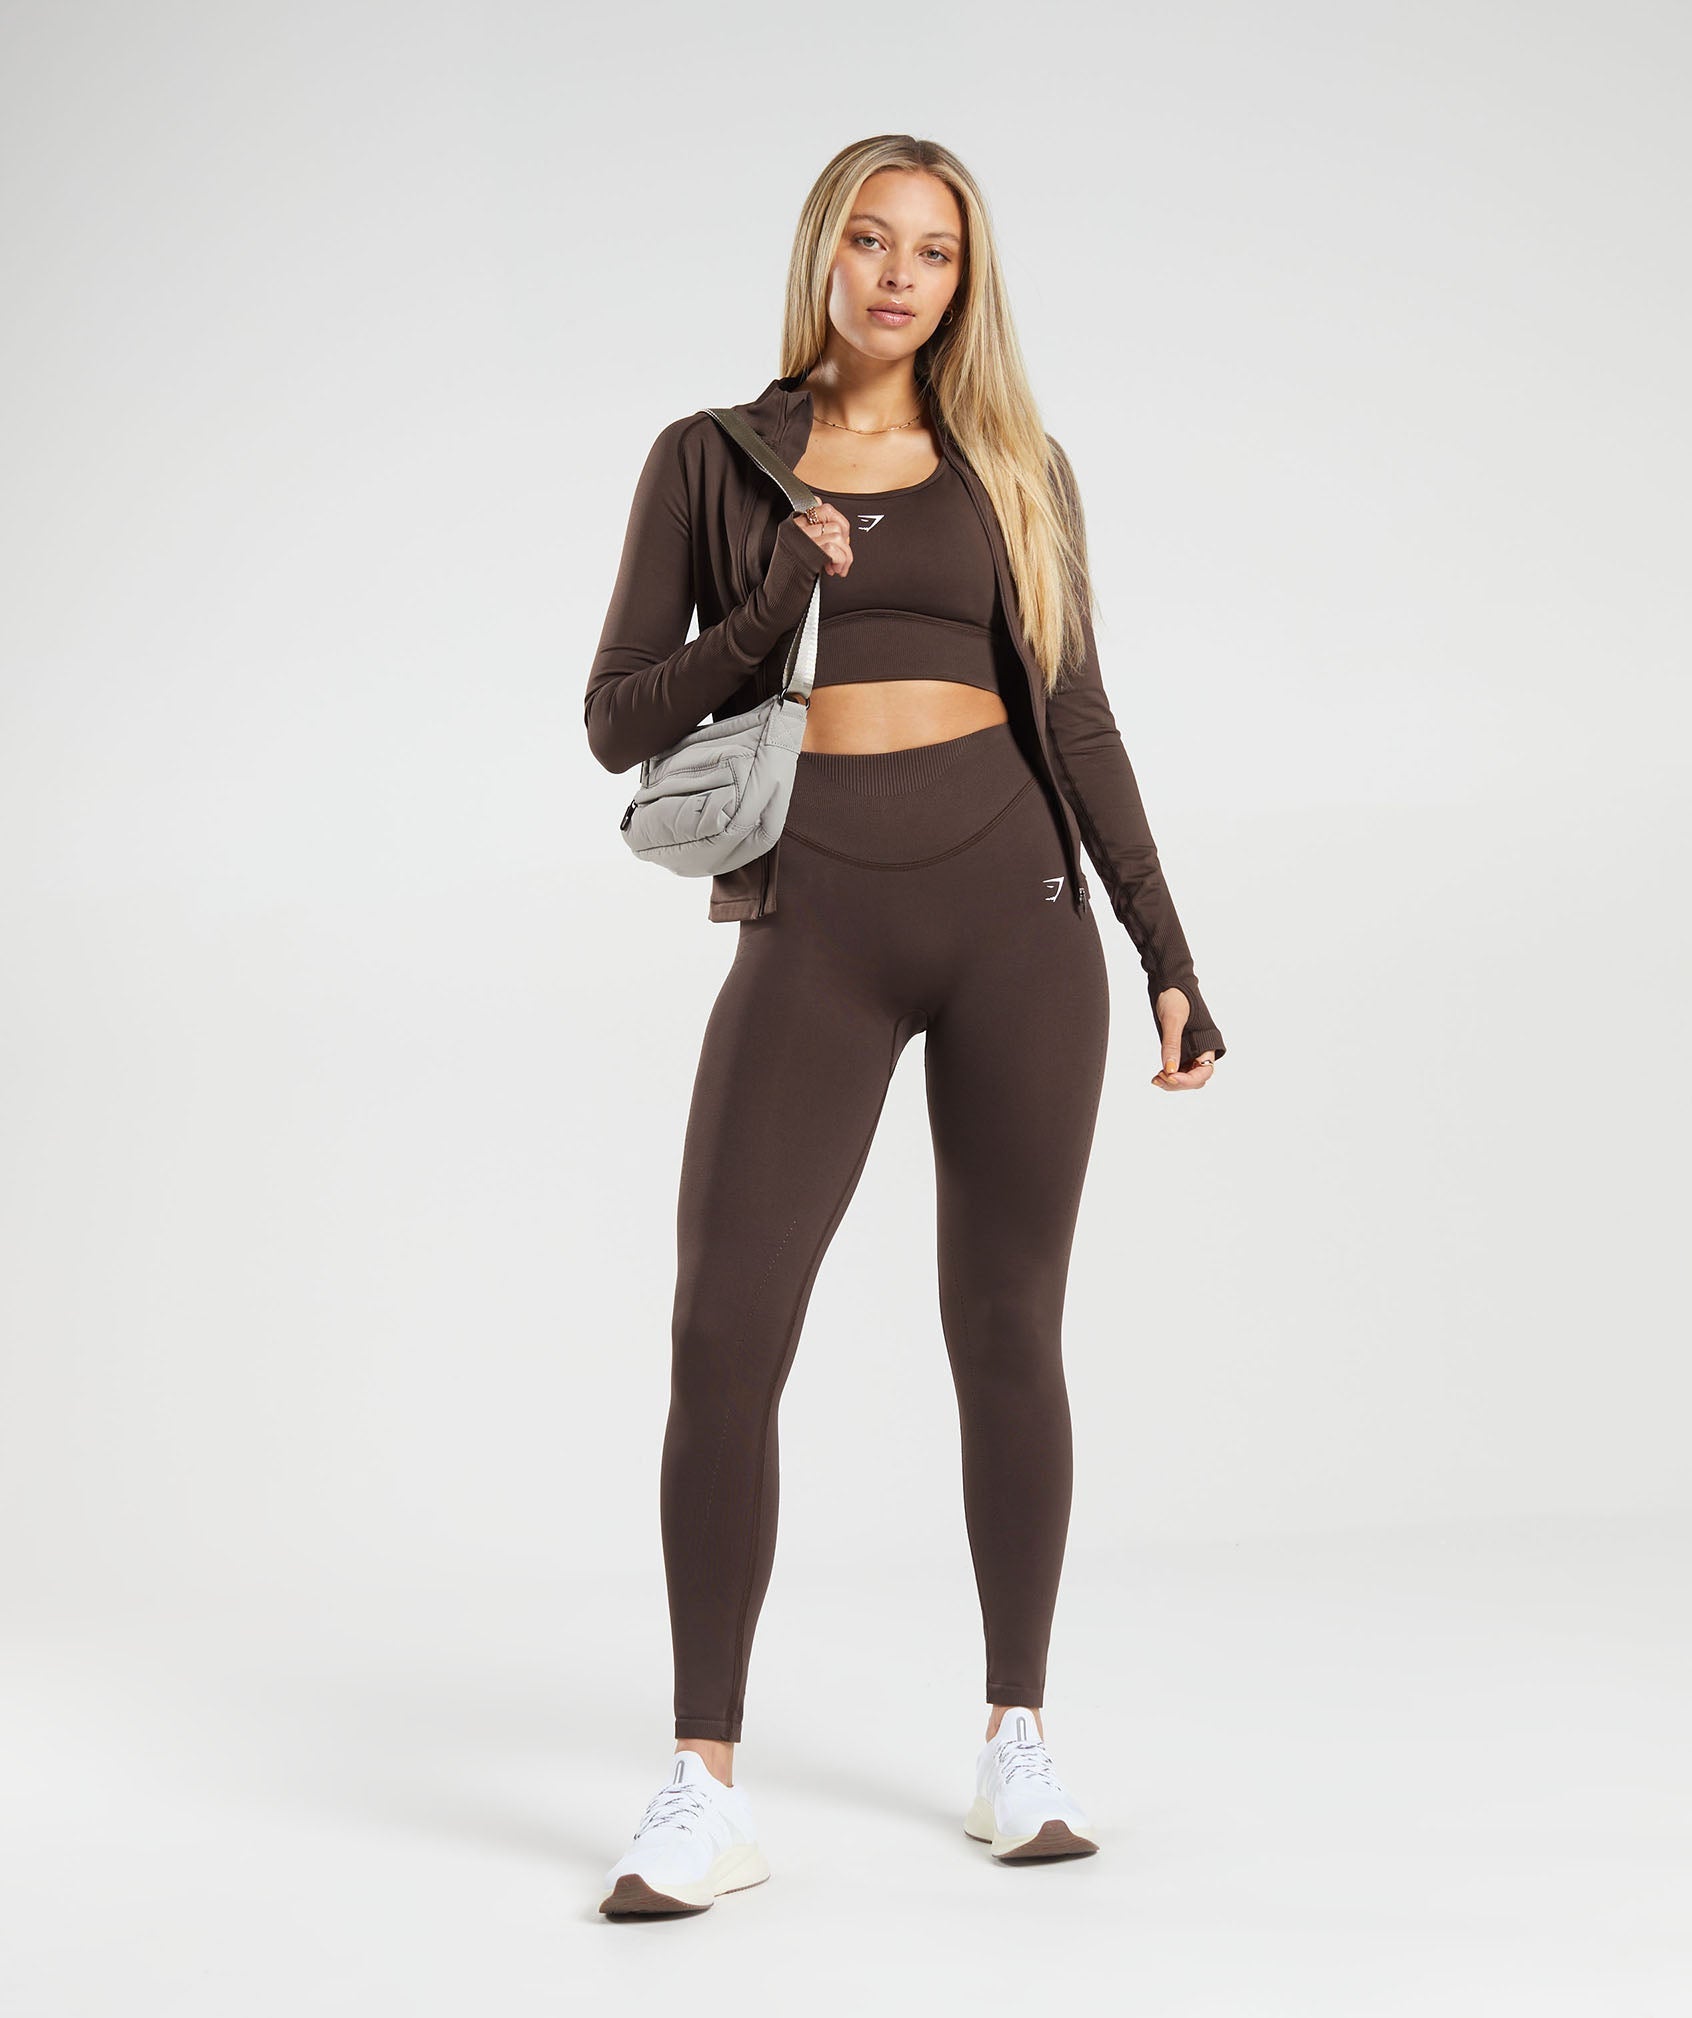 Seamless jacket with legging set tracksuit jogging set ! workout outfit